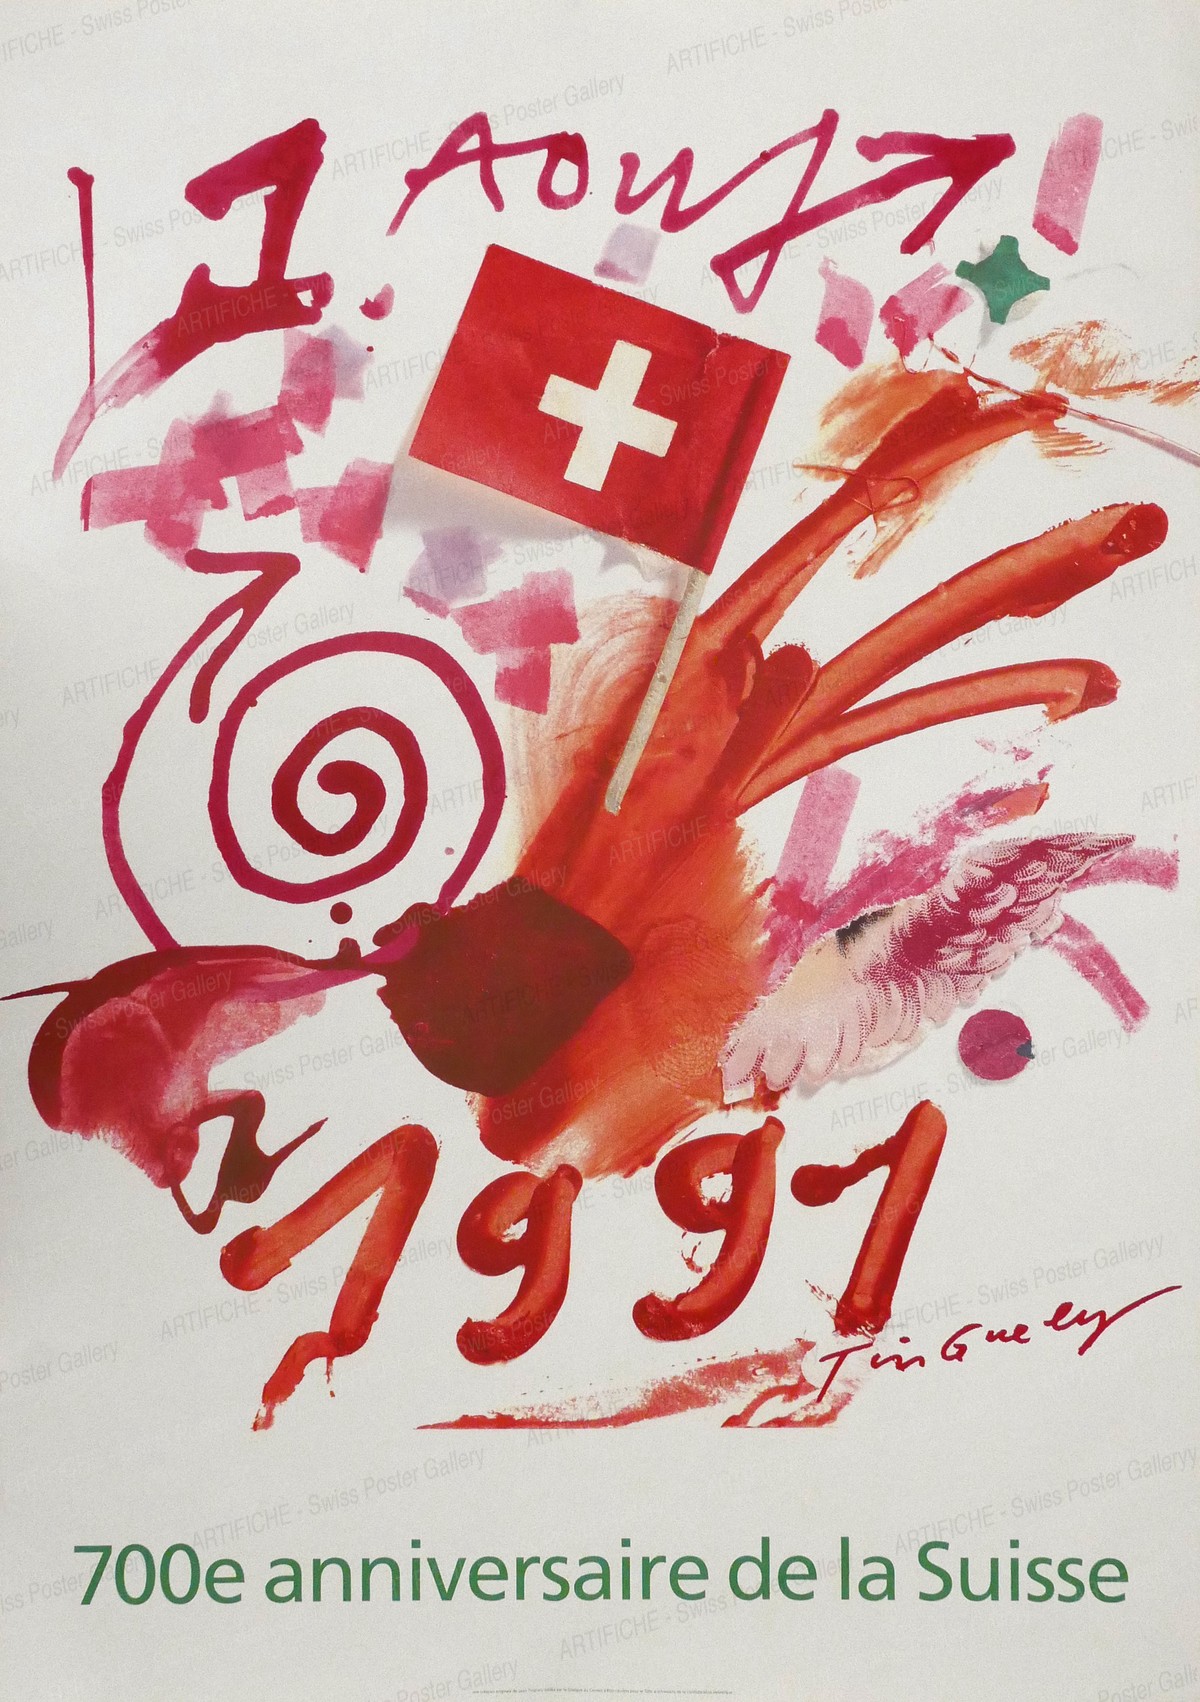 700th anniversary of Switzerland – 1 August 1991, Jean Tinguely